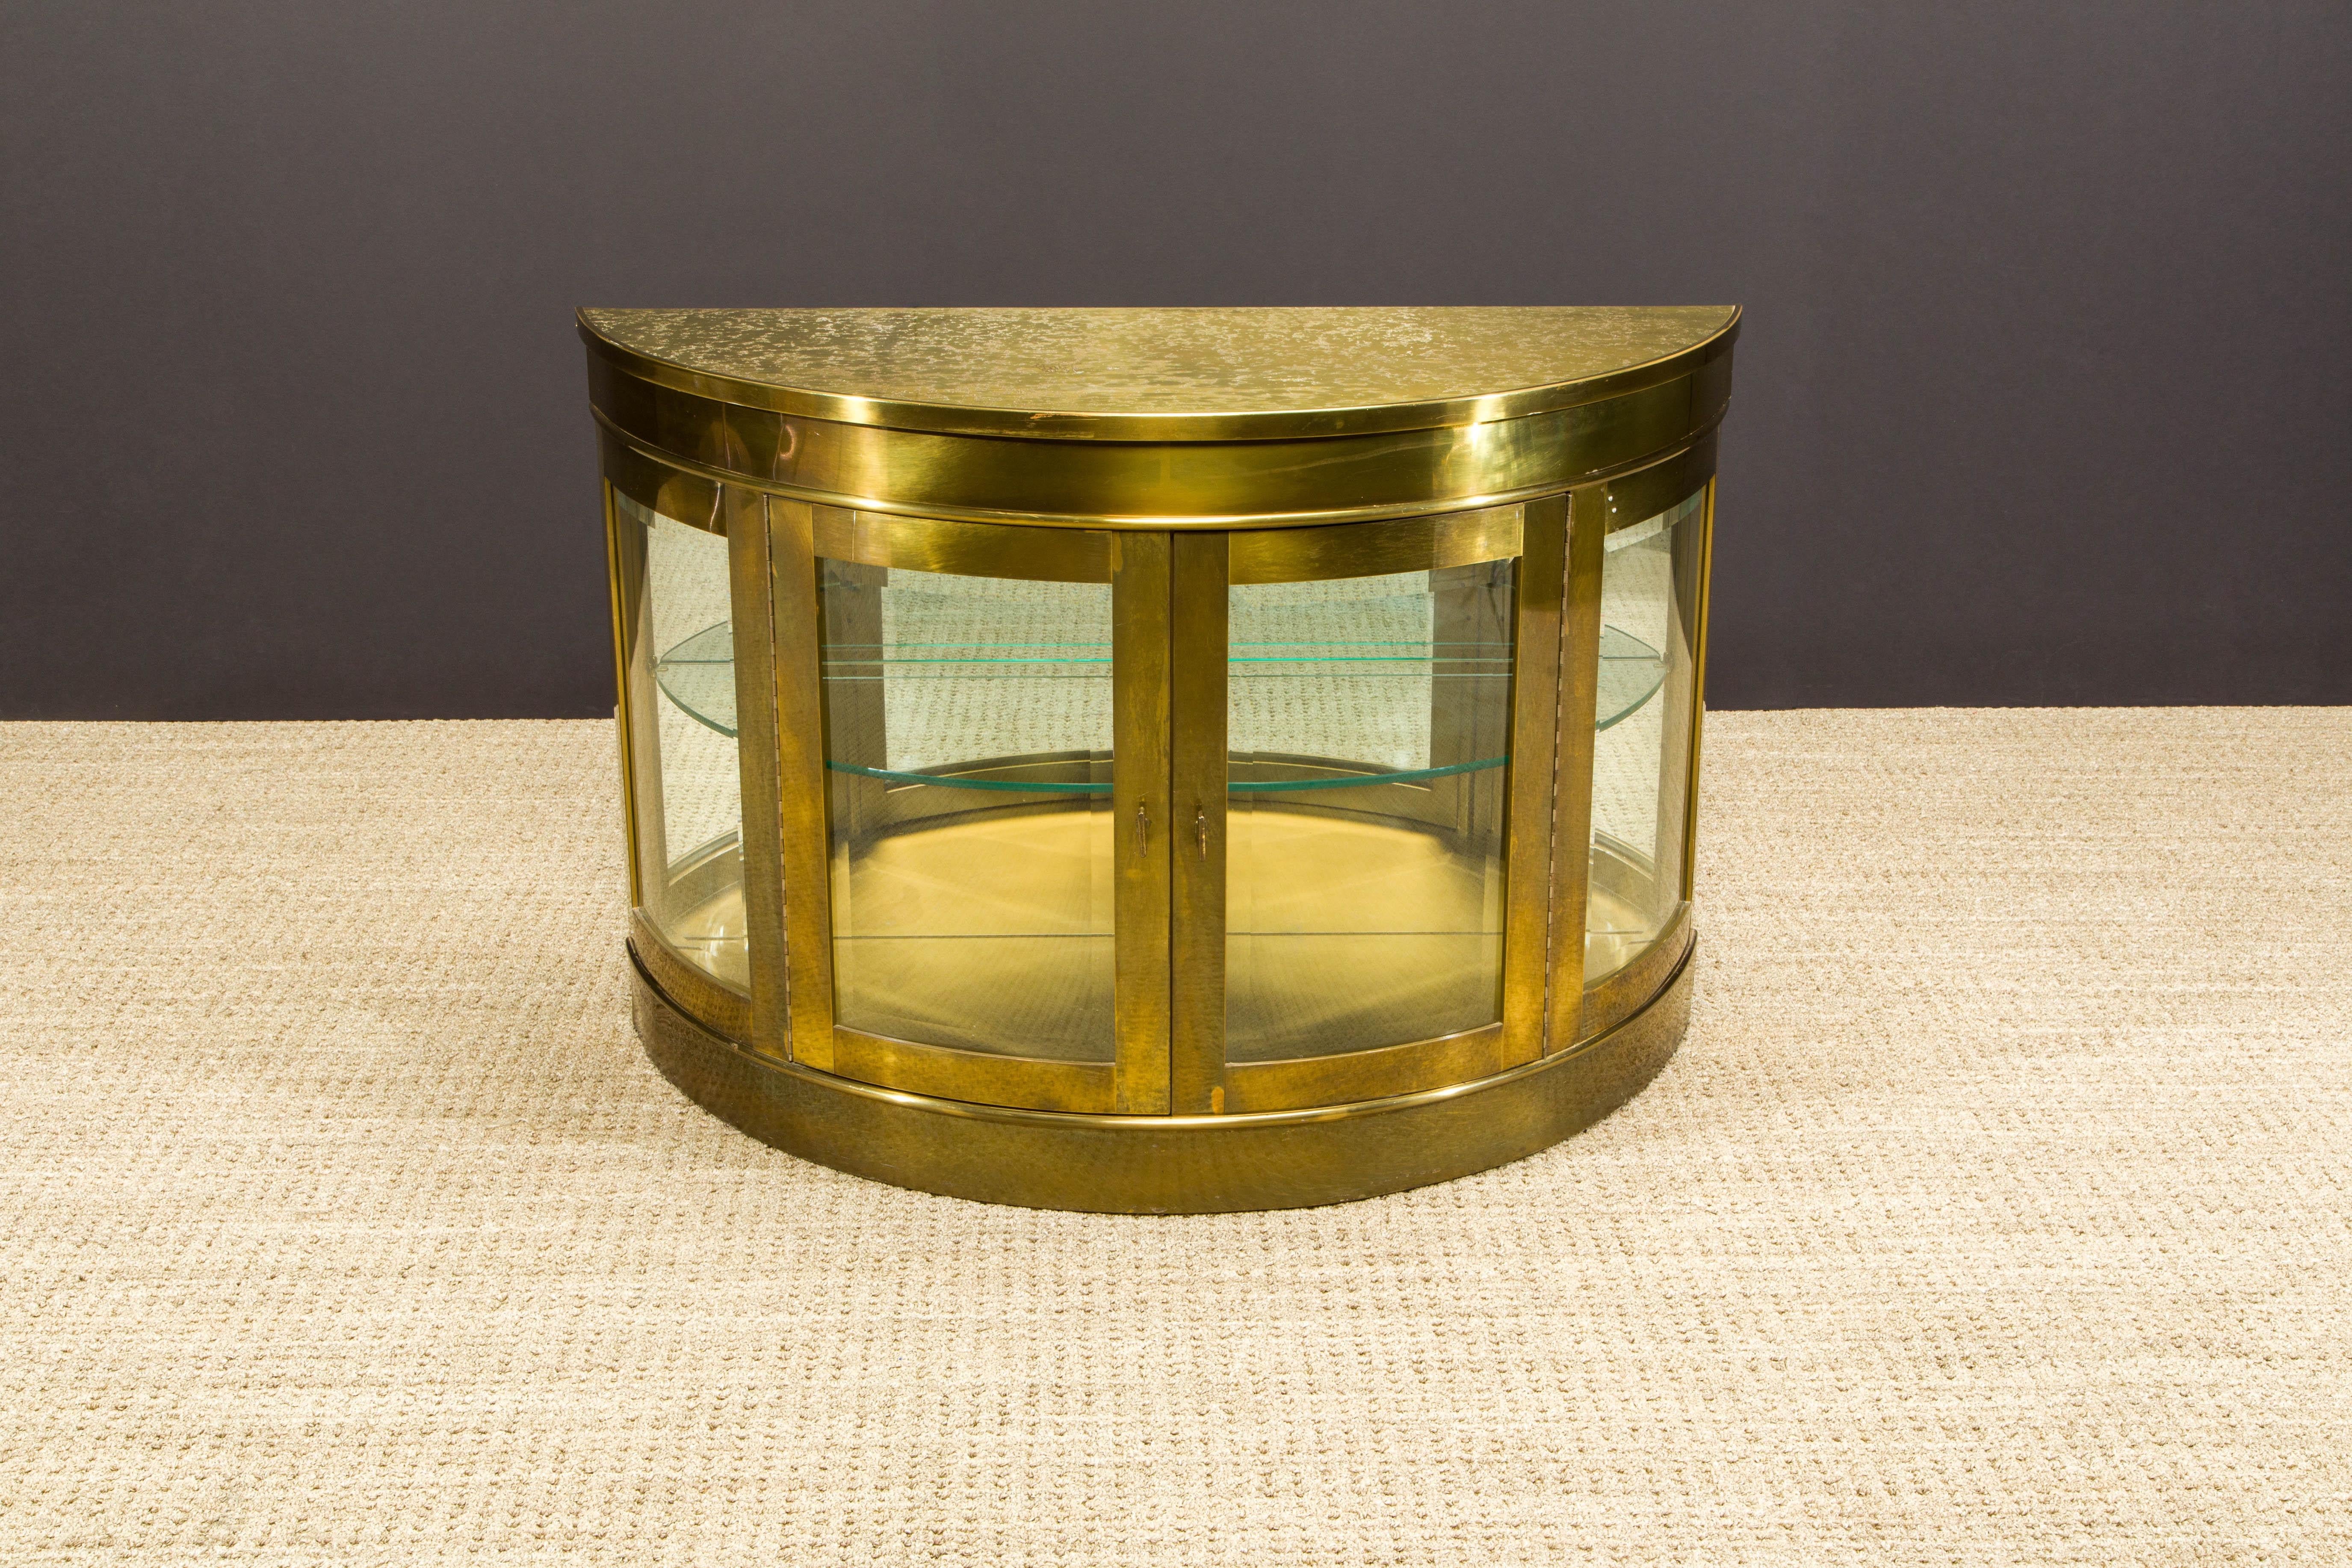 This incredible brass demilune display cabinet, produced by Mastercraft in the 1970s, features a mirrored and illuminated interior, exquisite textured top, a pair of glass doors and interior glass shelf. 

What makes this amazing design even more